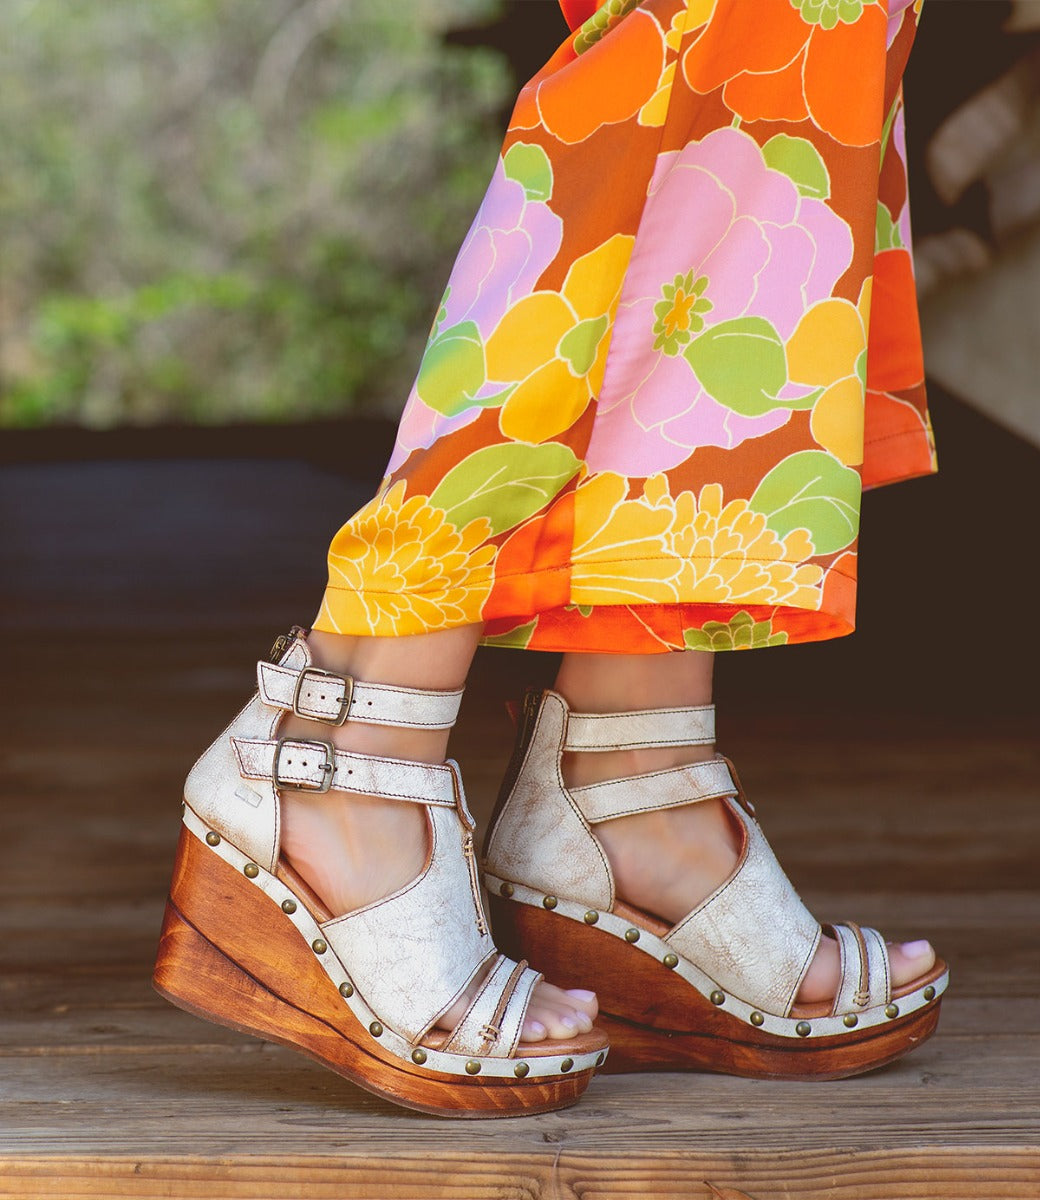 A woman wearing a floral dress and Bed Stu Princess wedge sandals.